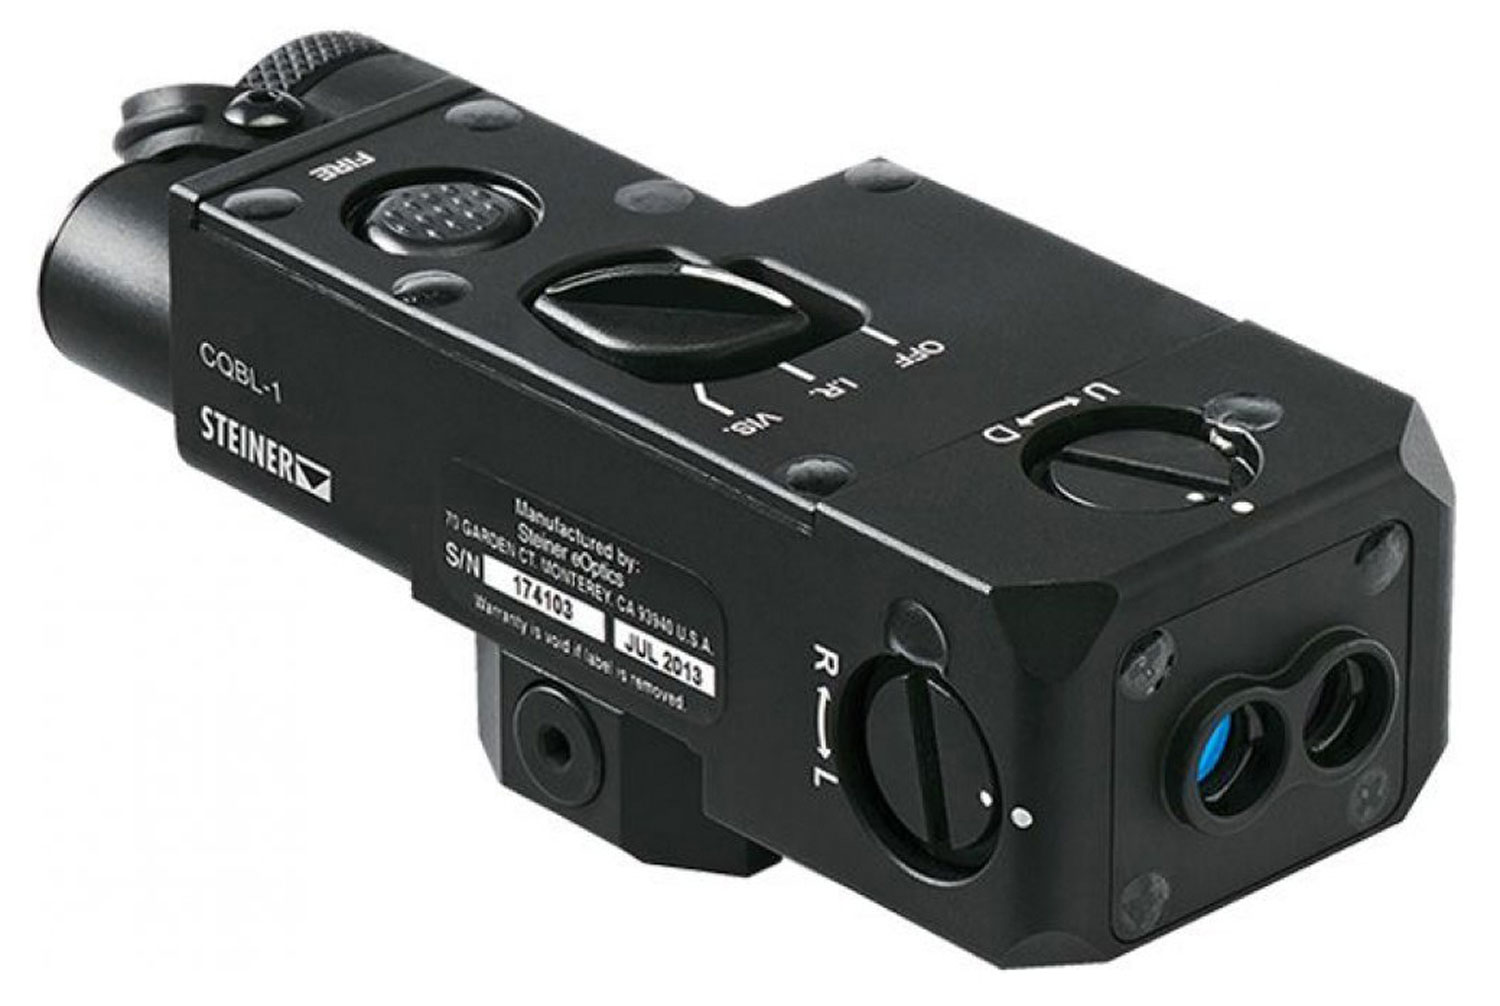 Steiner 9030 CQBL-1  5mW Red Laser with 635nM Wavelength & 0.7mW, 850nM Wavelength IR Pointer with Black Finish & Picatinny Mount